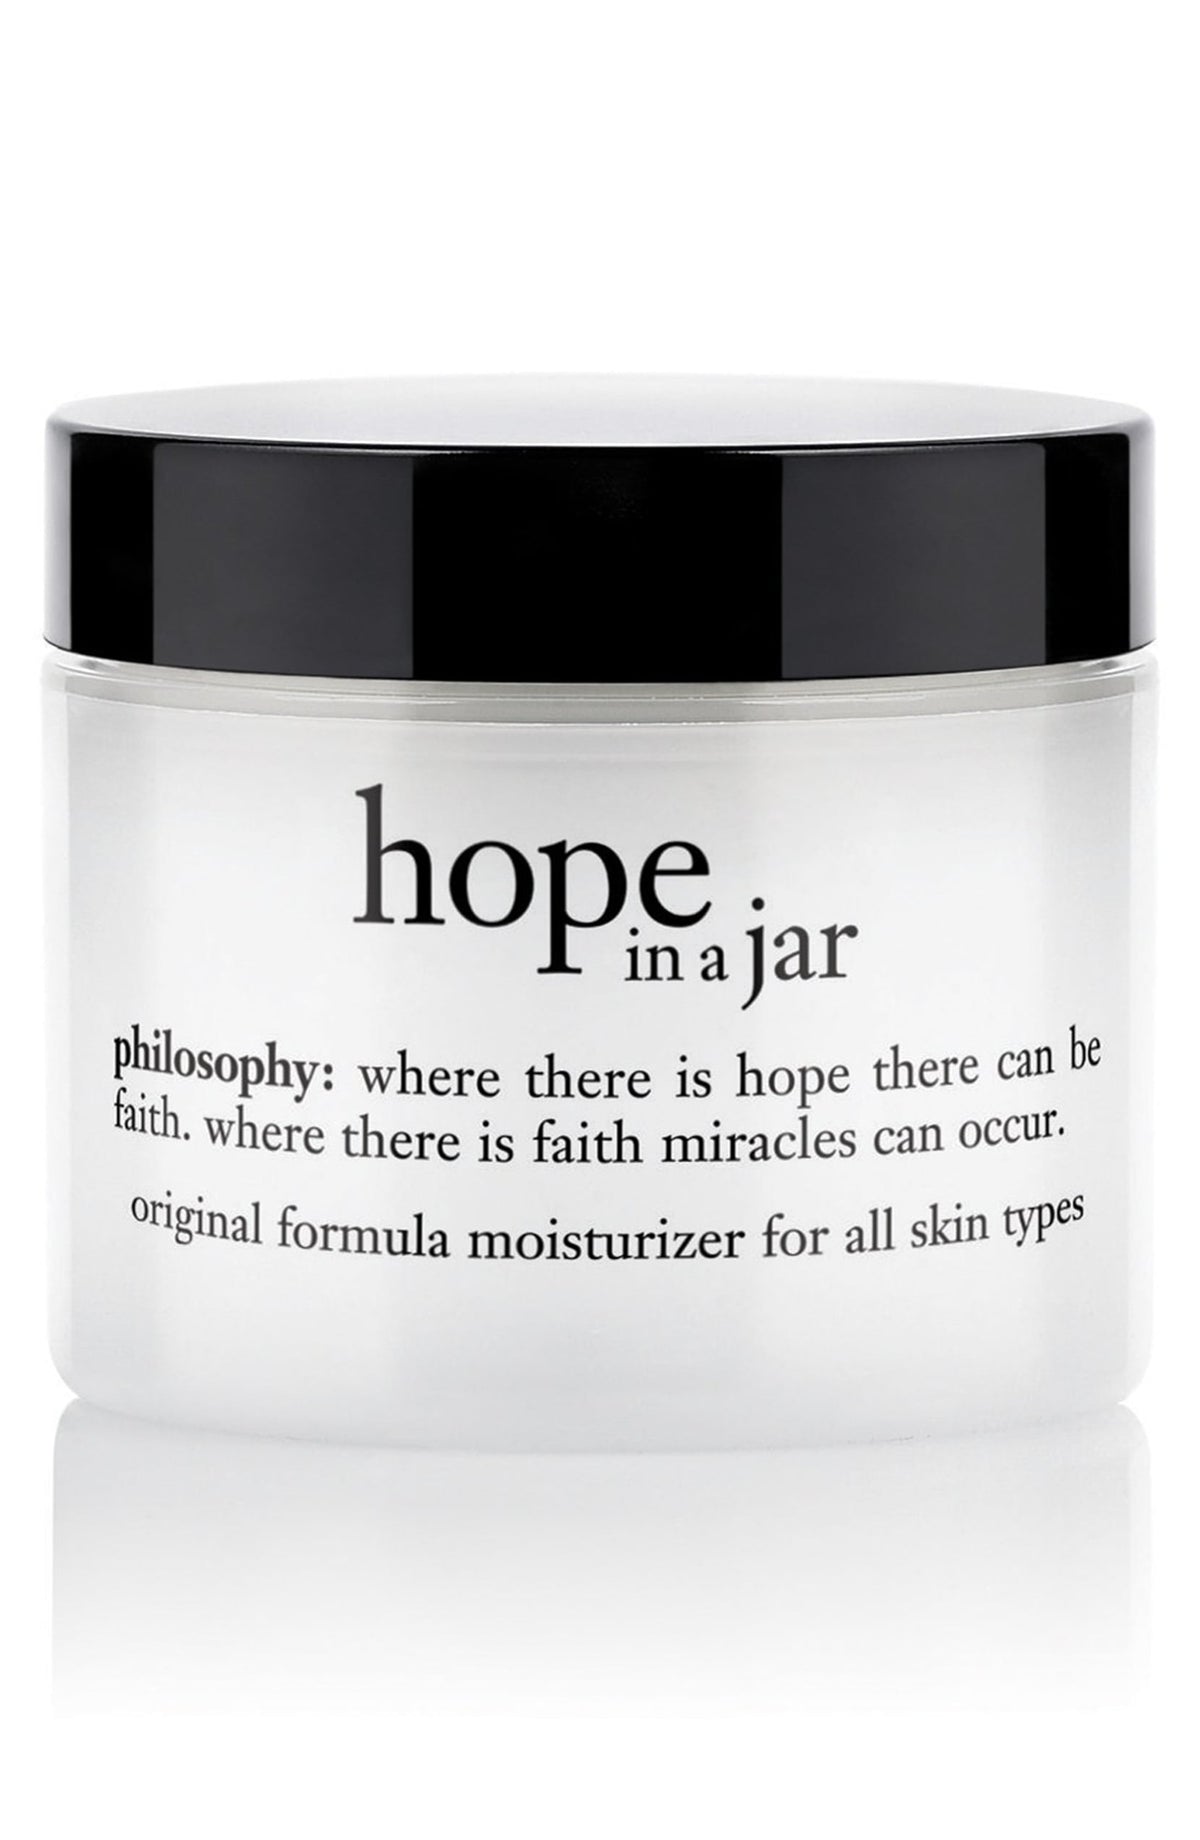 philosophy hope in a jar face moisturizer for all skin types